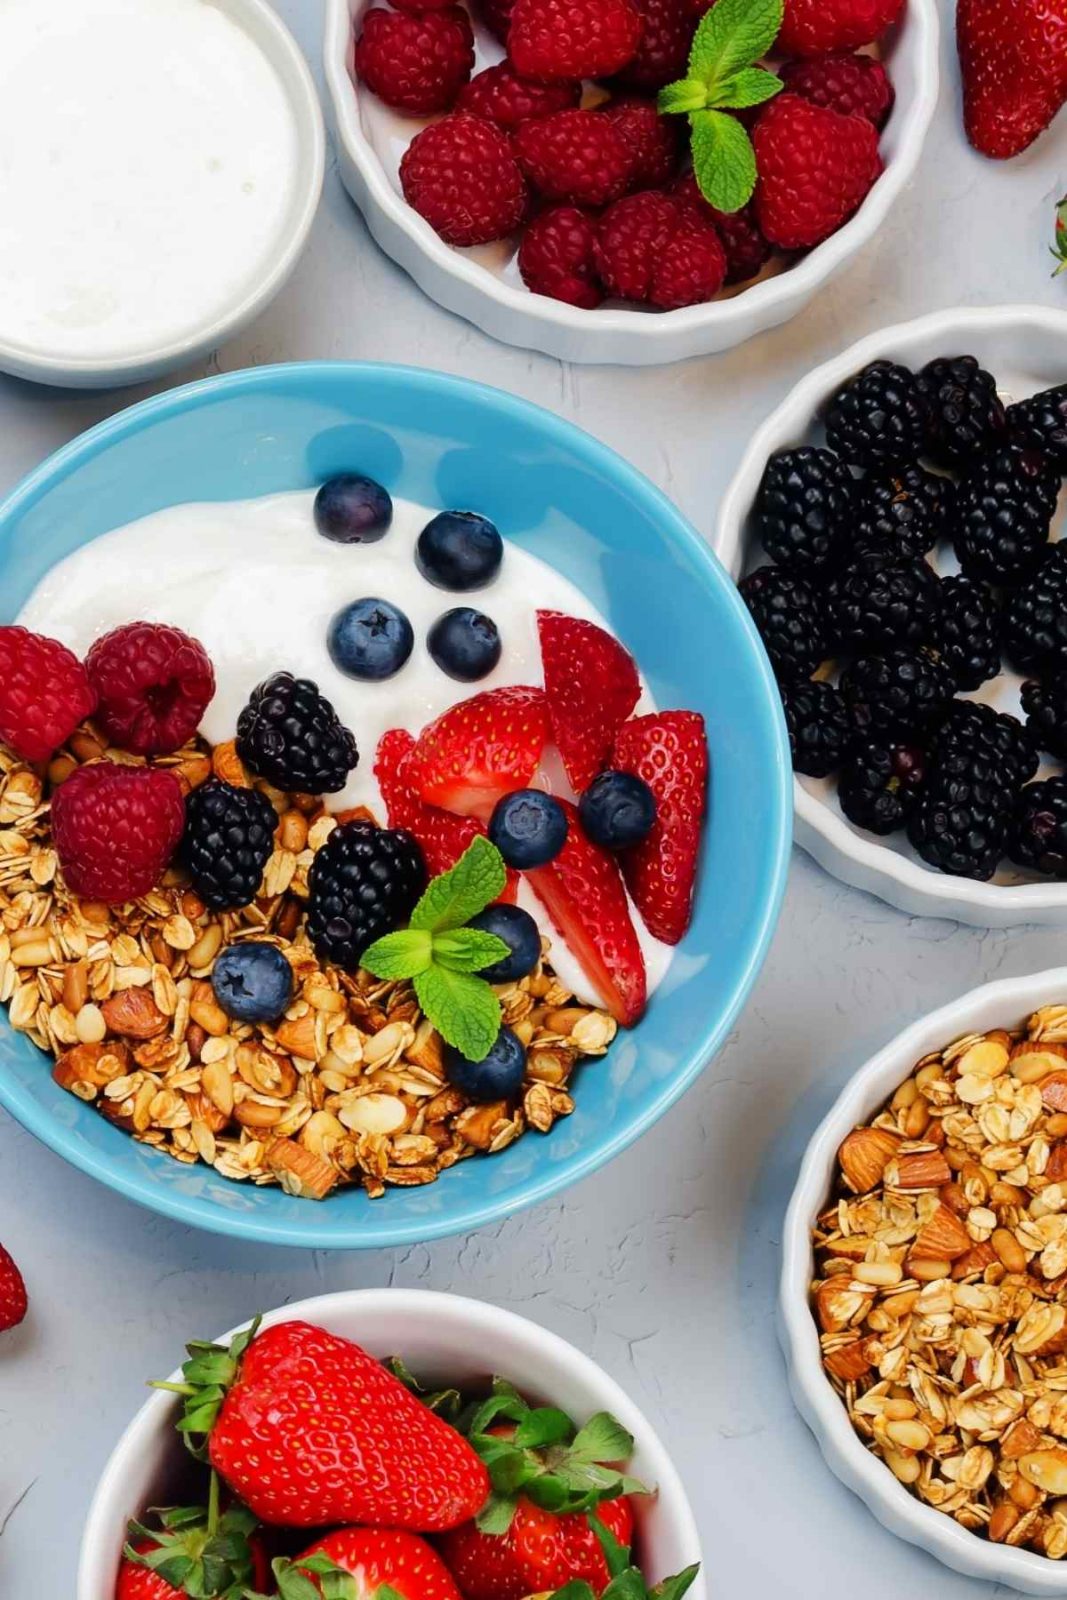 Getting your day off to a healthy start isn’t always easy but this yogurt and granola bowl is about to change that. Start your day with plenty of nutrients and great flavor with this recipe. Adding granola to your usual yogurt and fruit can make your breakfast heartier and tastier.